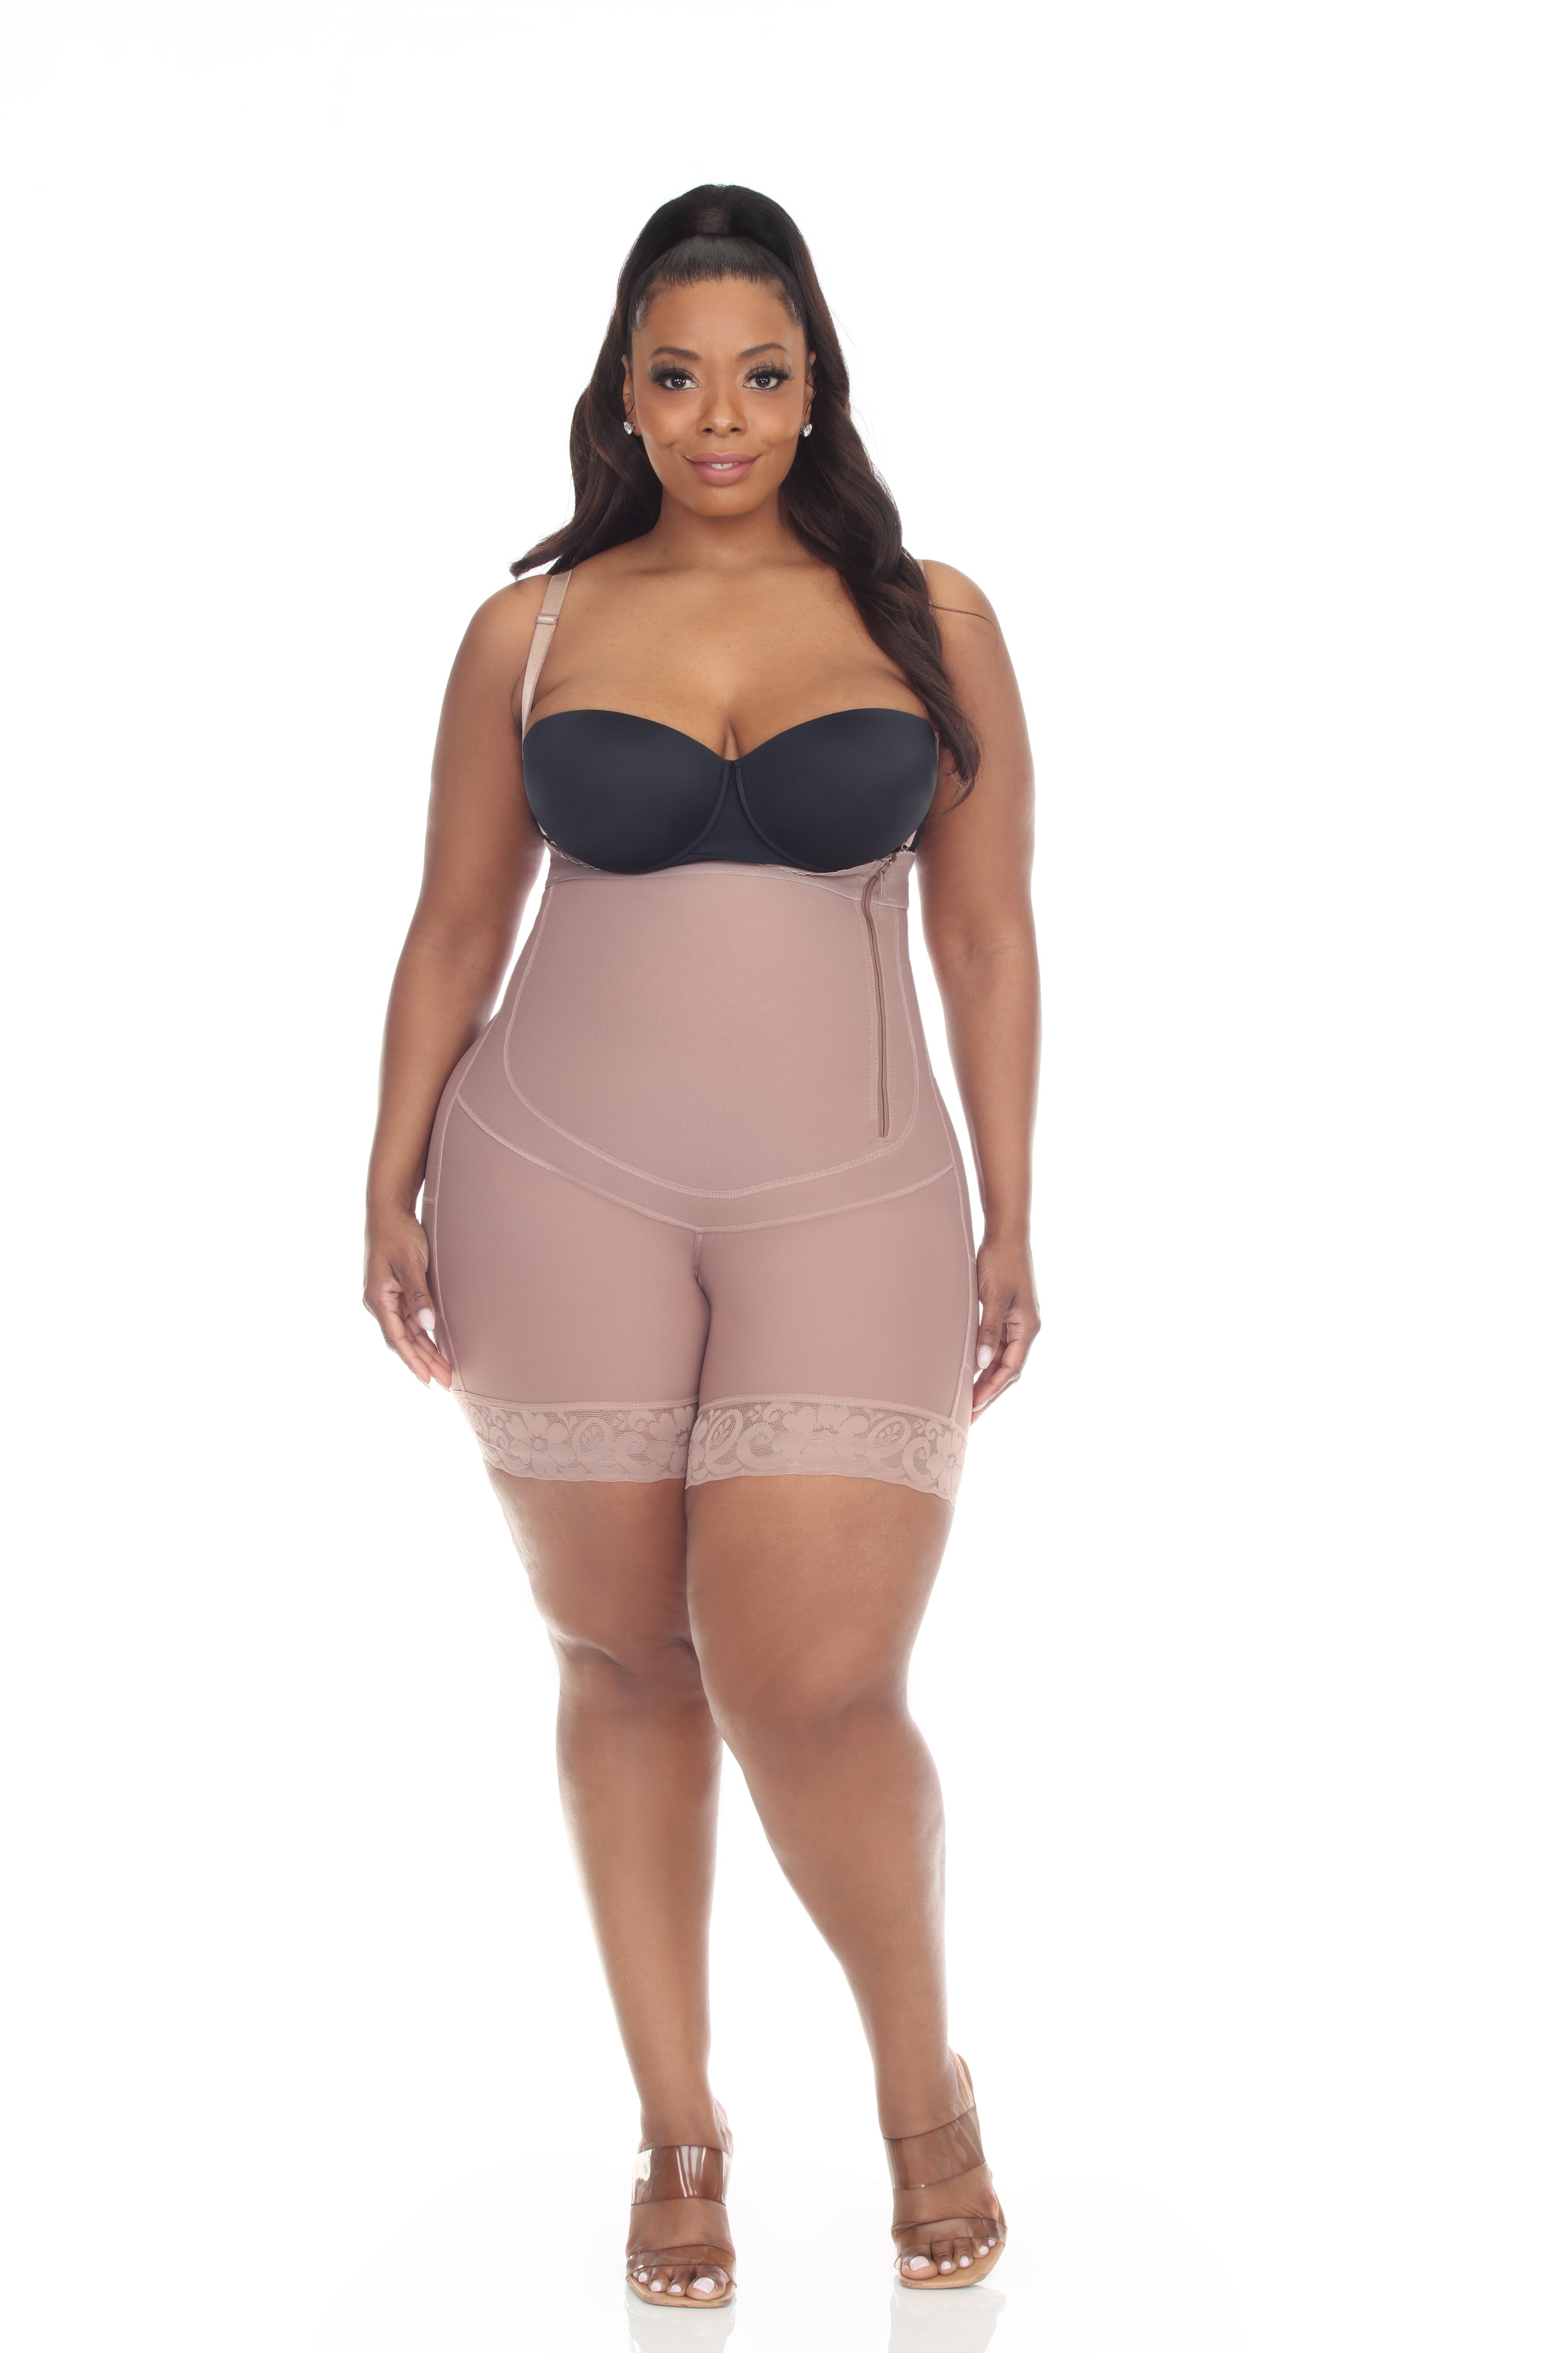 UpLady 6184  Butt Lifting Shapewear Bodysuit with Wide Hips